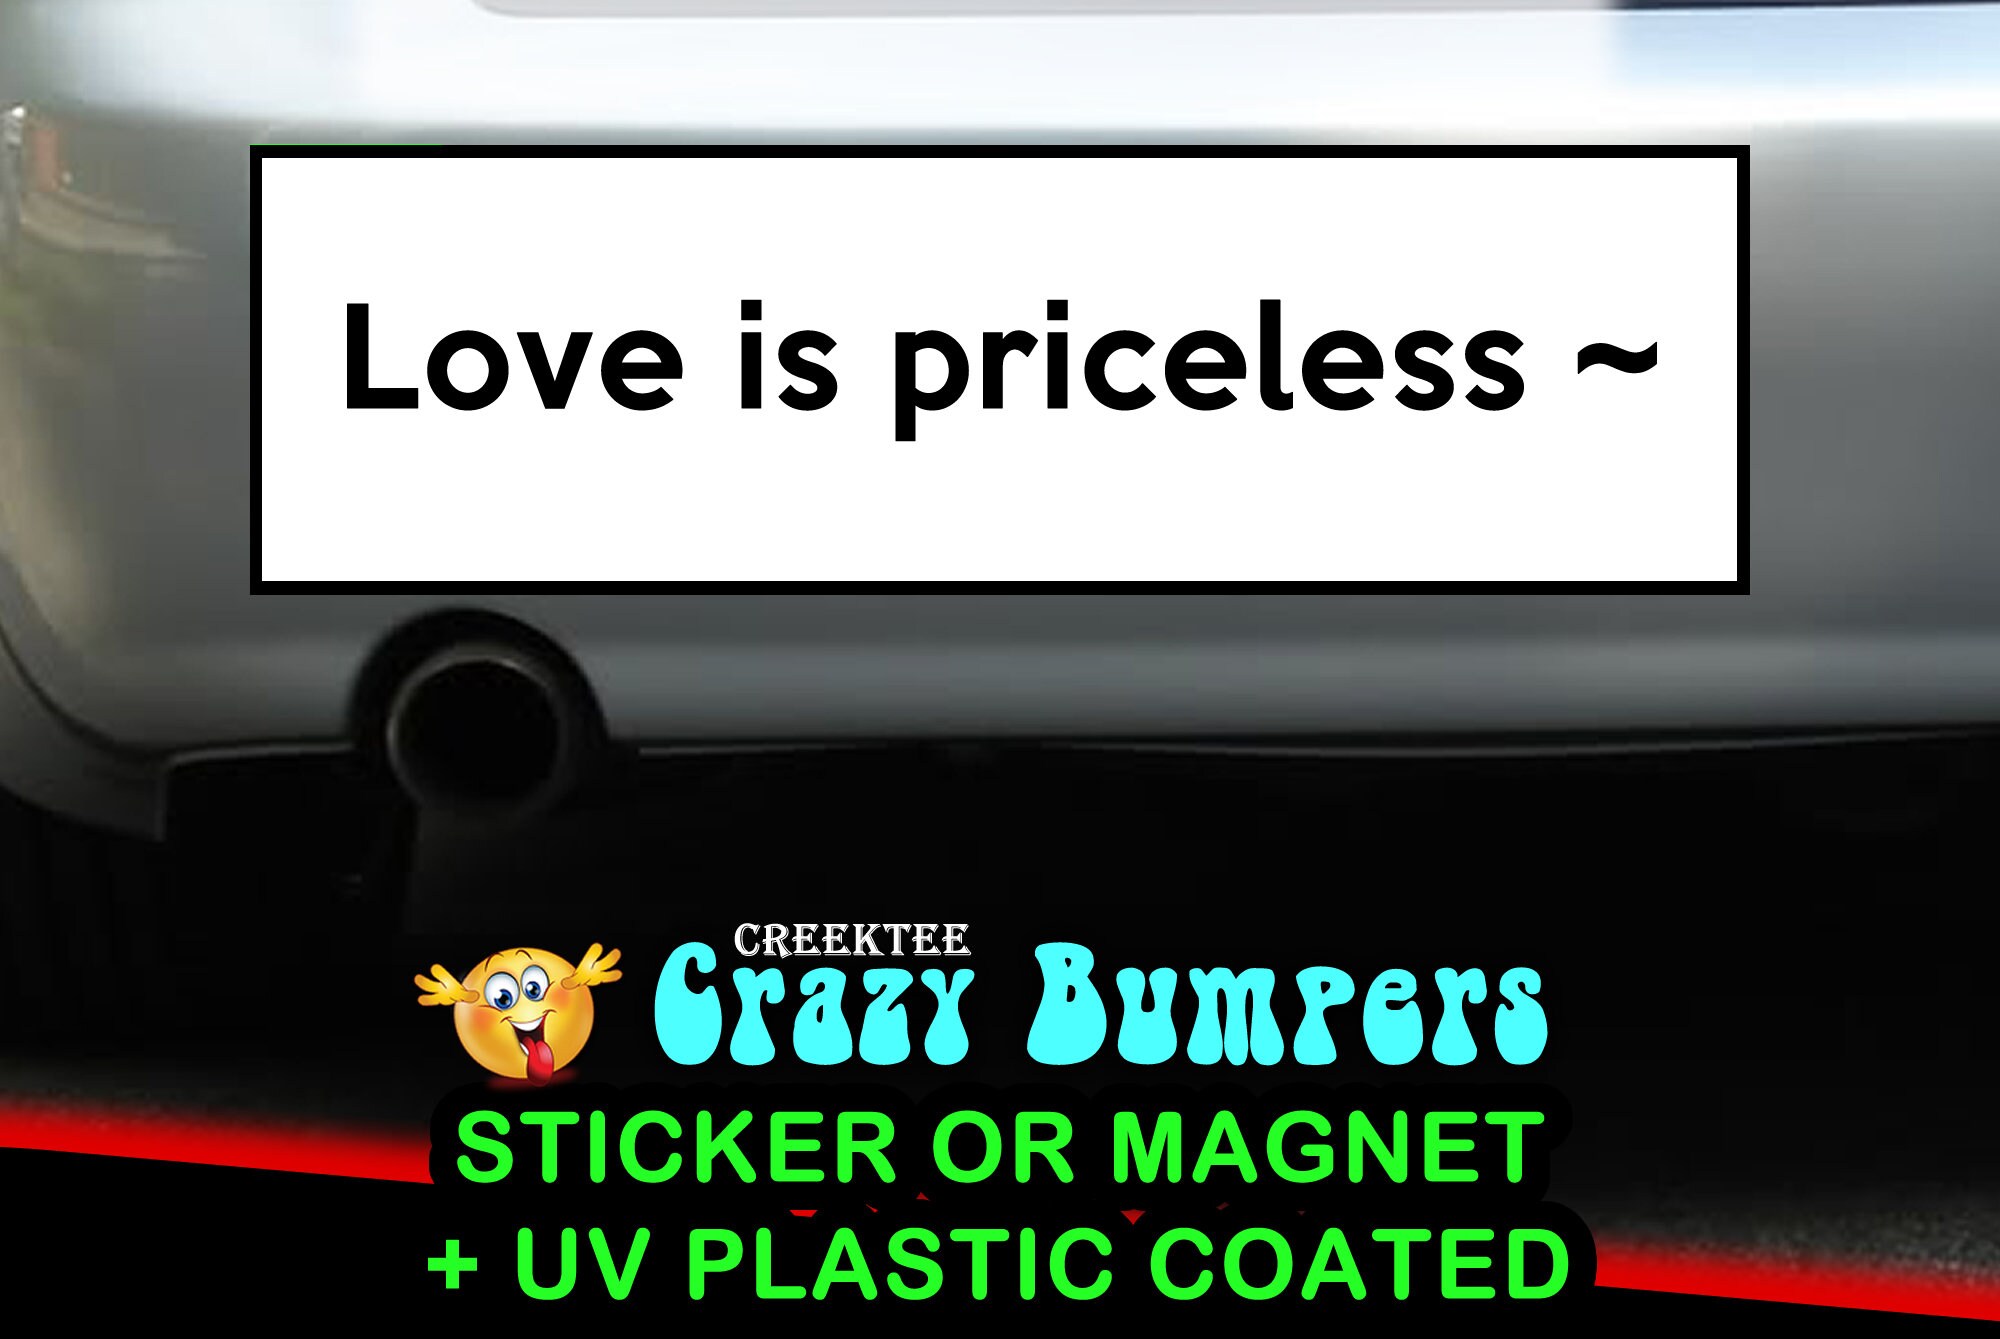 Love is priceless 10 x 3 Bumper Sticker or Magnetic Bumper Sticker Available